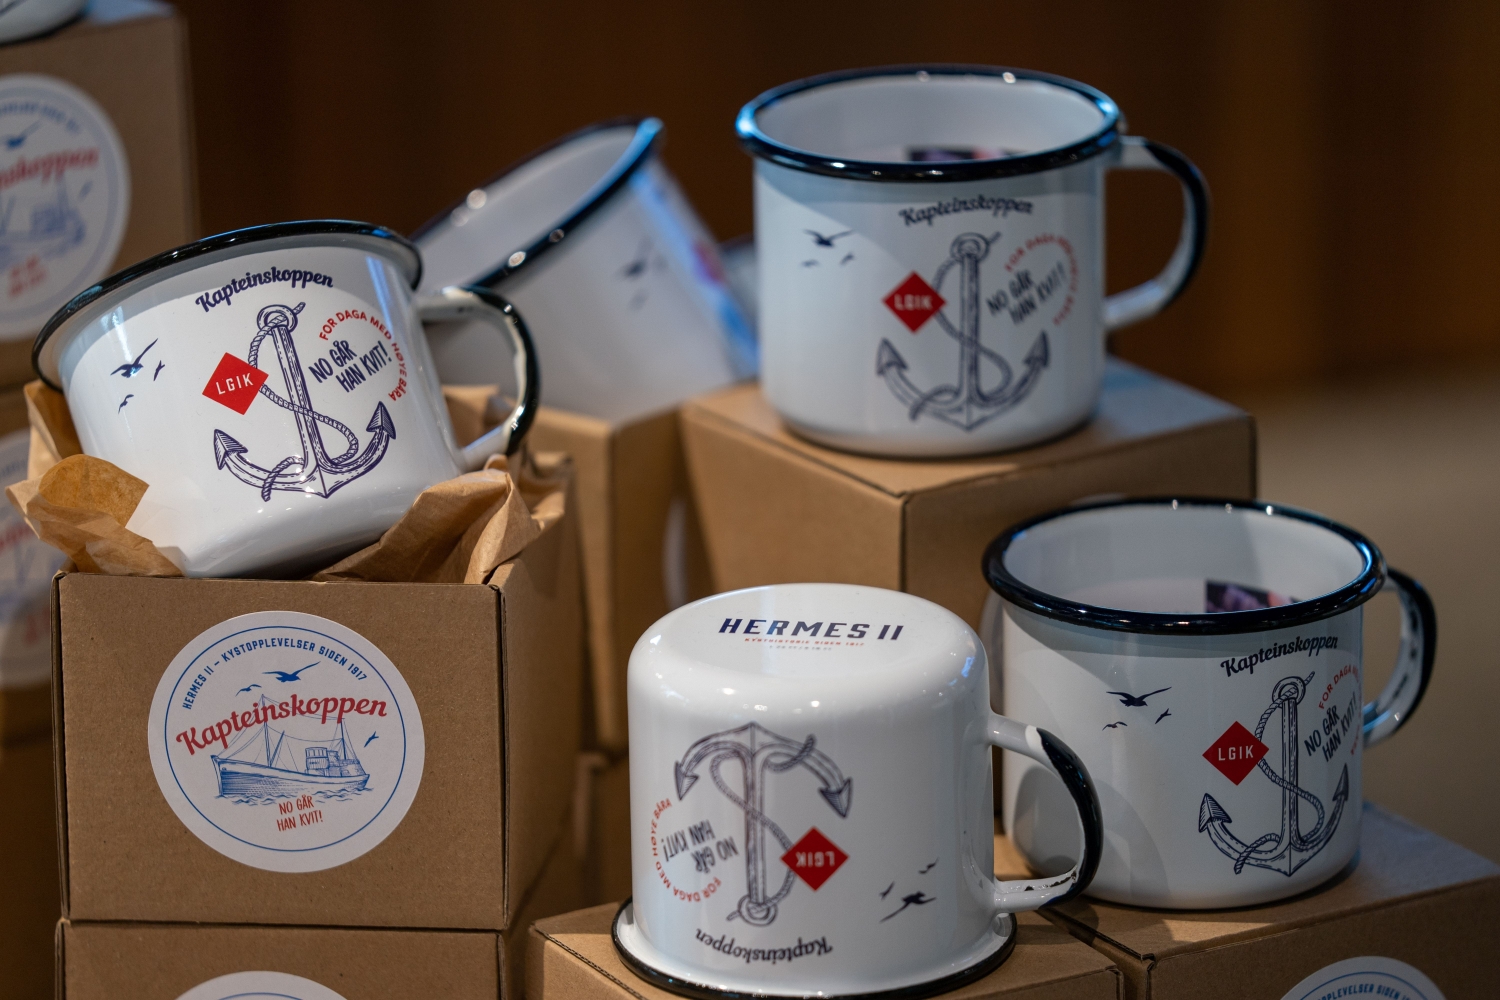 Cups with Hermes 2 logo